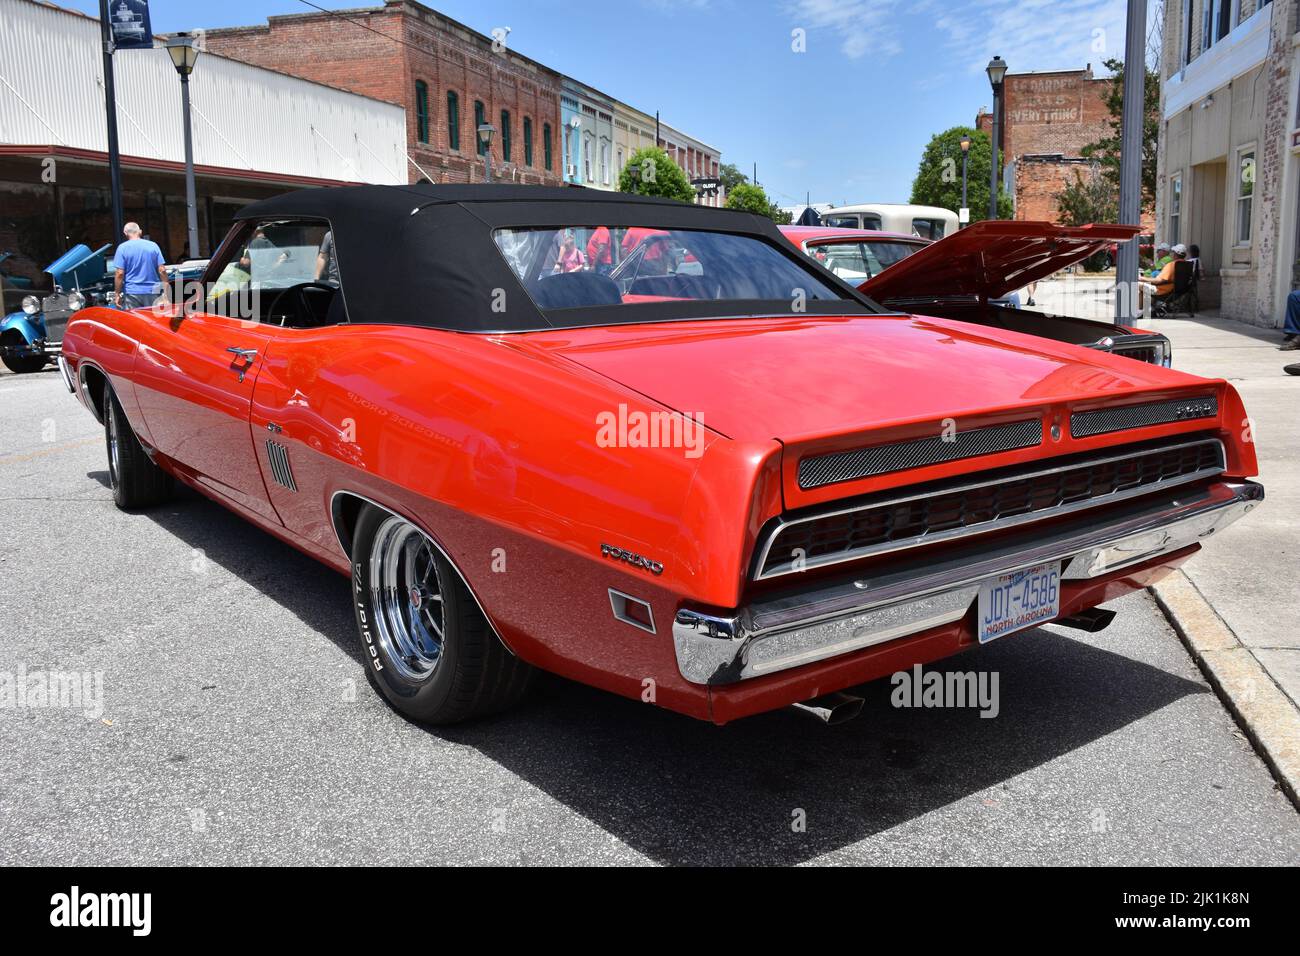 A 1970 Ford Torino GT 429 Cobra Jet on display at a car show. Stock Photo